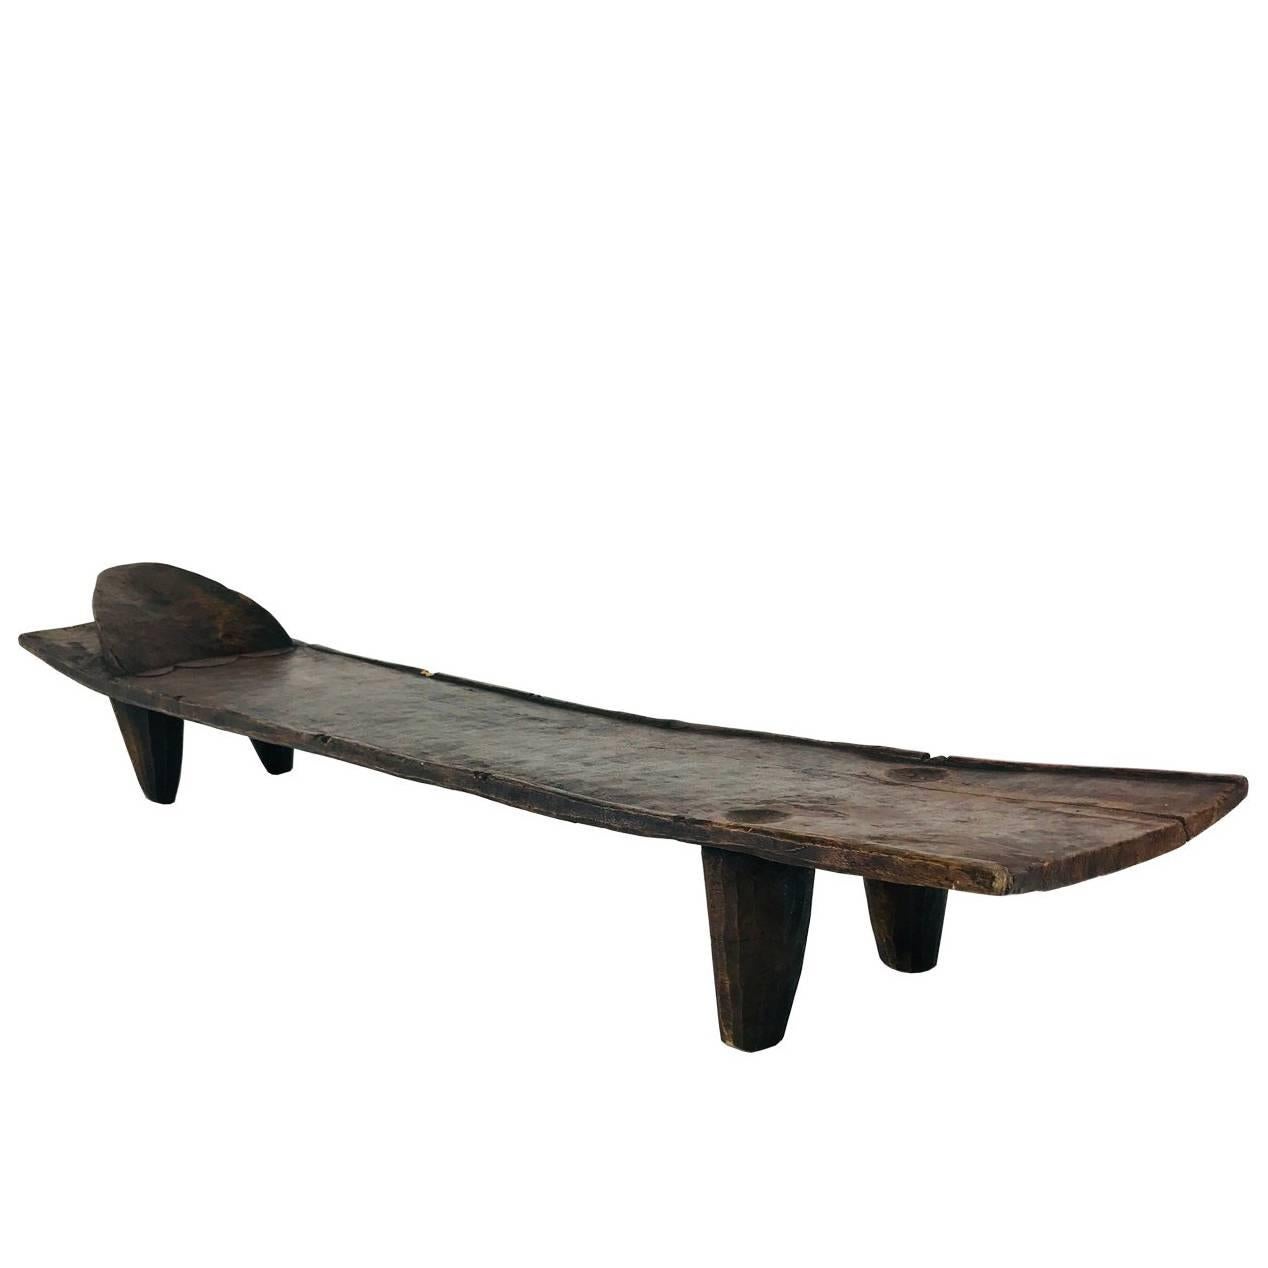 West African Craved Wood Bed/Bench by the Senufo Tribe